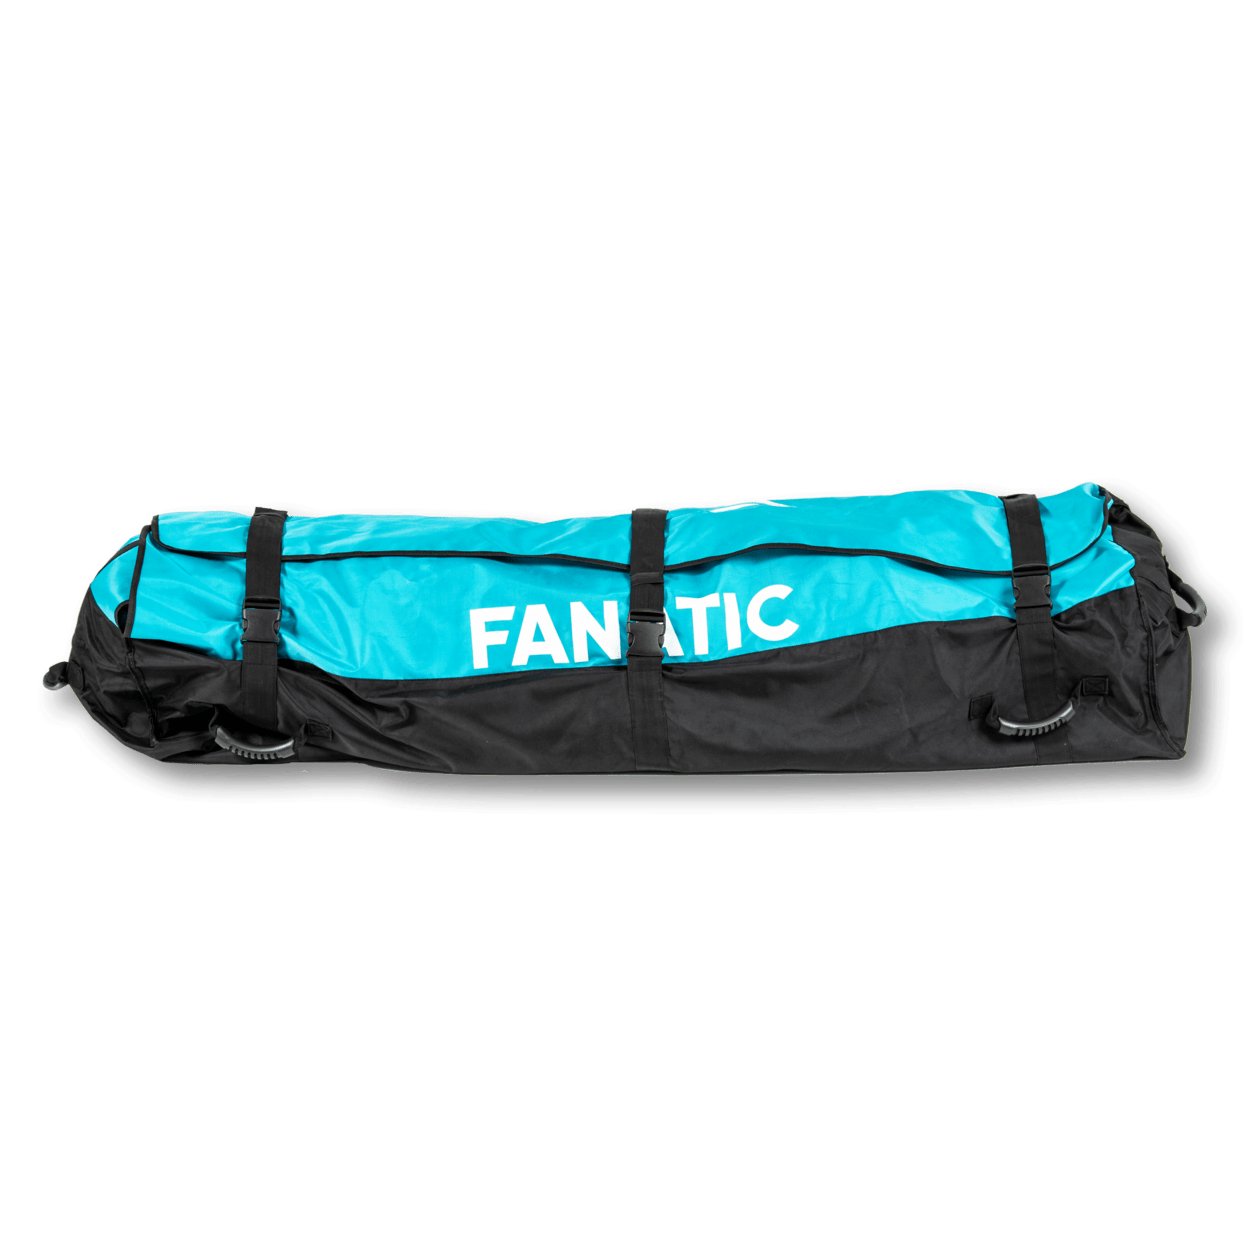 Fanatic Gearbag Fly Air XL 2024 - Worthing Watersports - 9008415928071 - Spareparts - Fanatic SUP